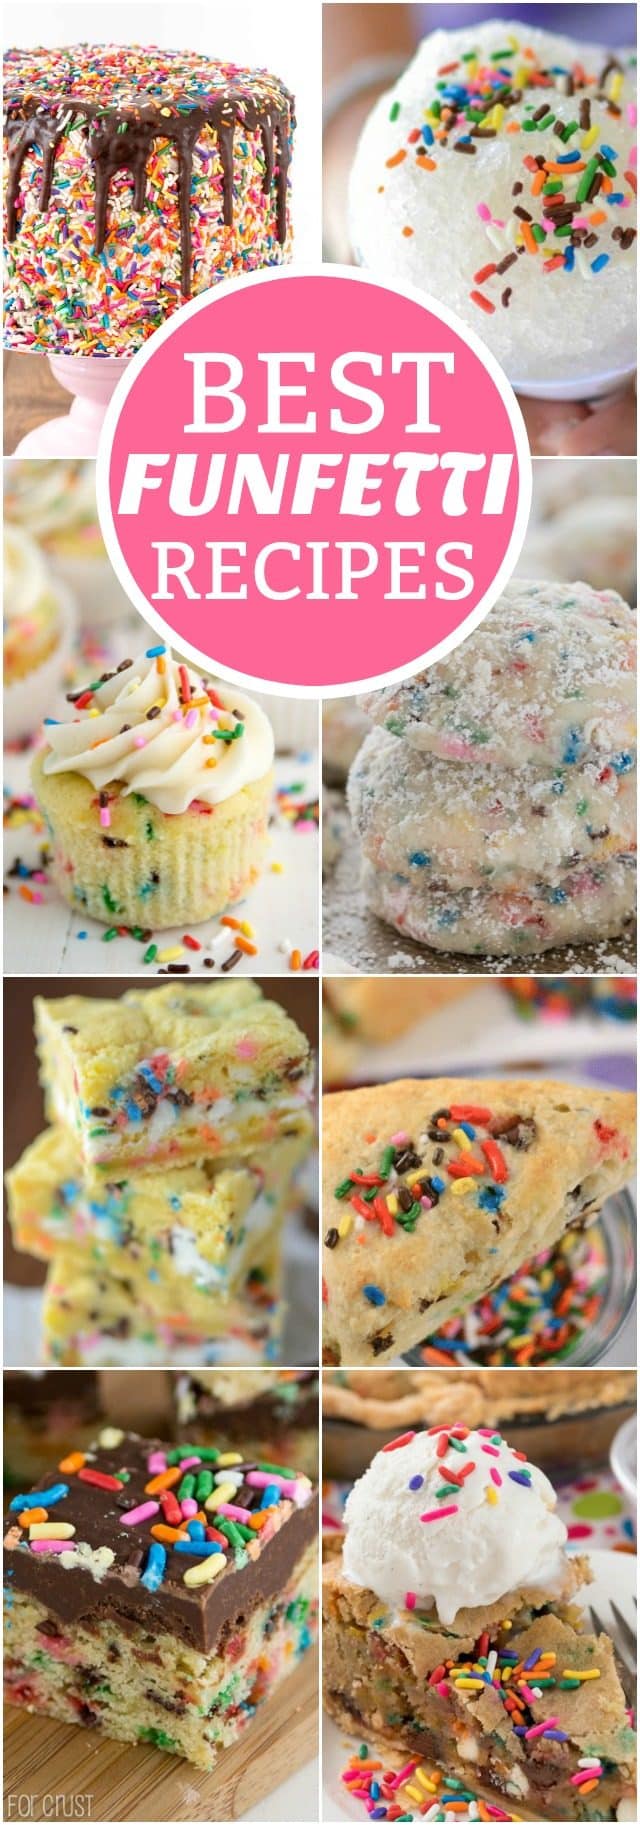 8 picture collage of funfetti recipes with graphic title.